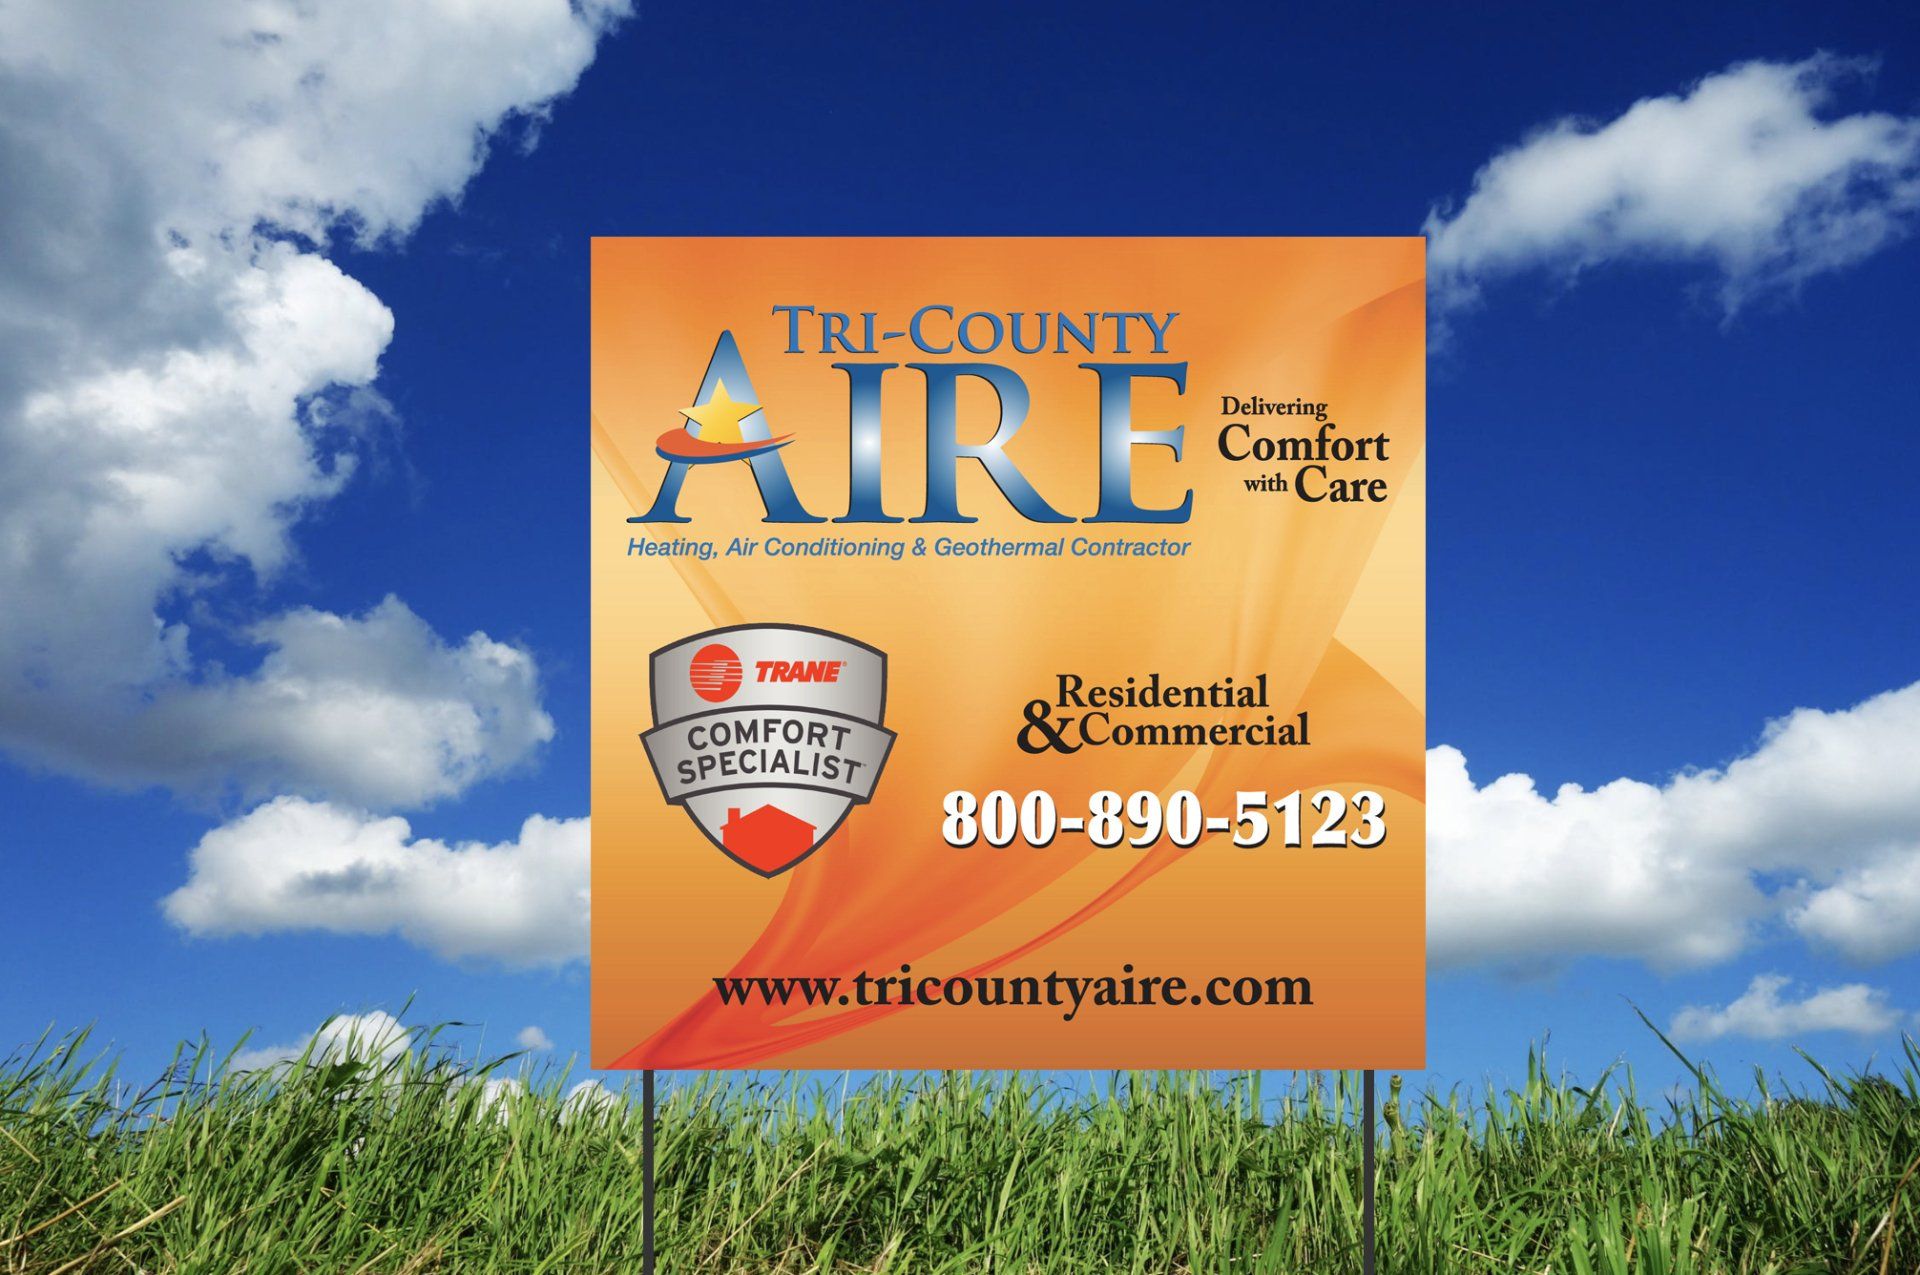 A sign for tri-county aire is in the middle of a grassy field